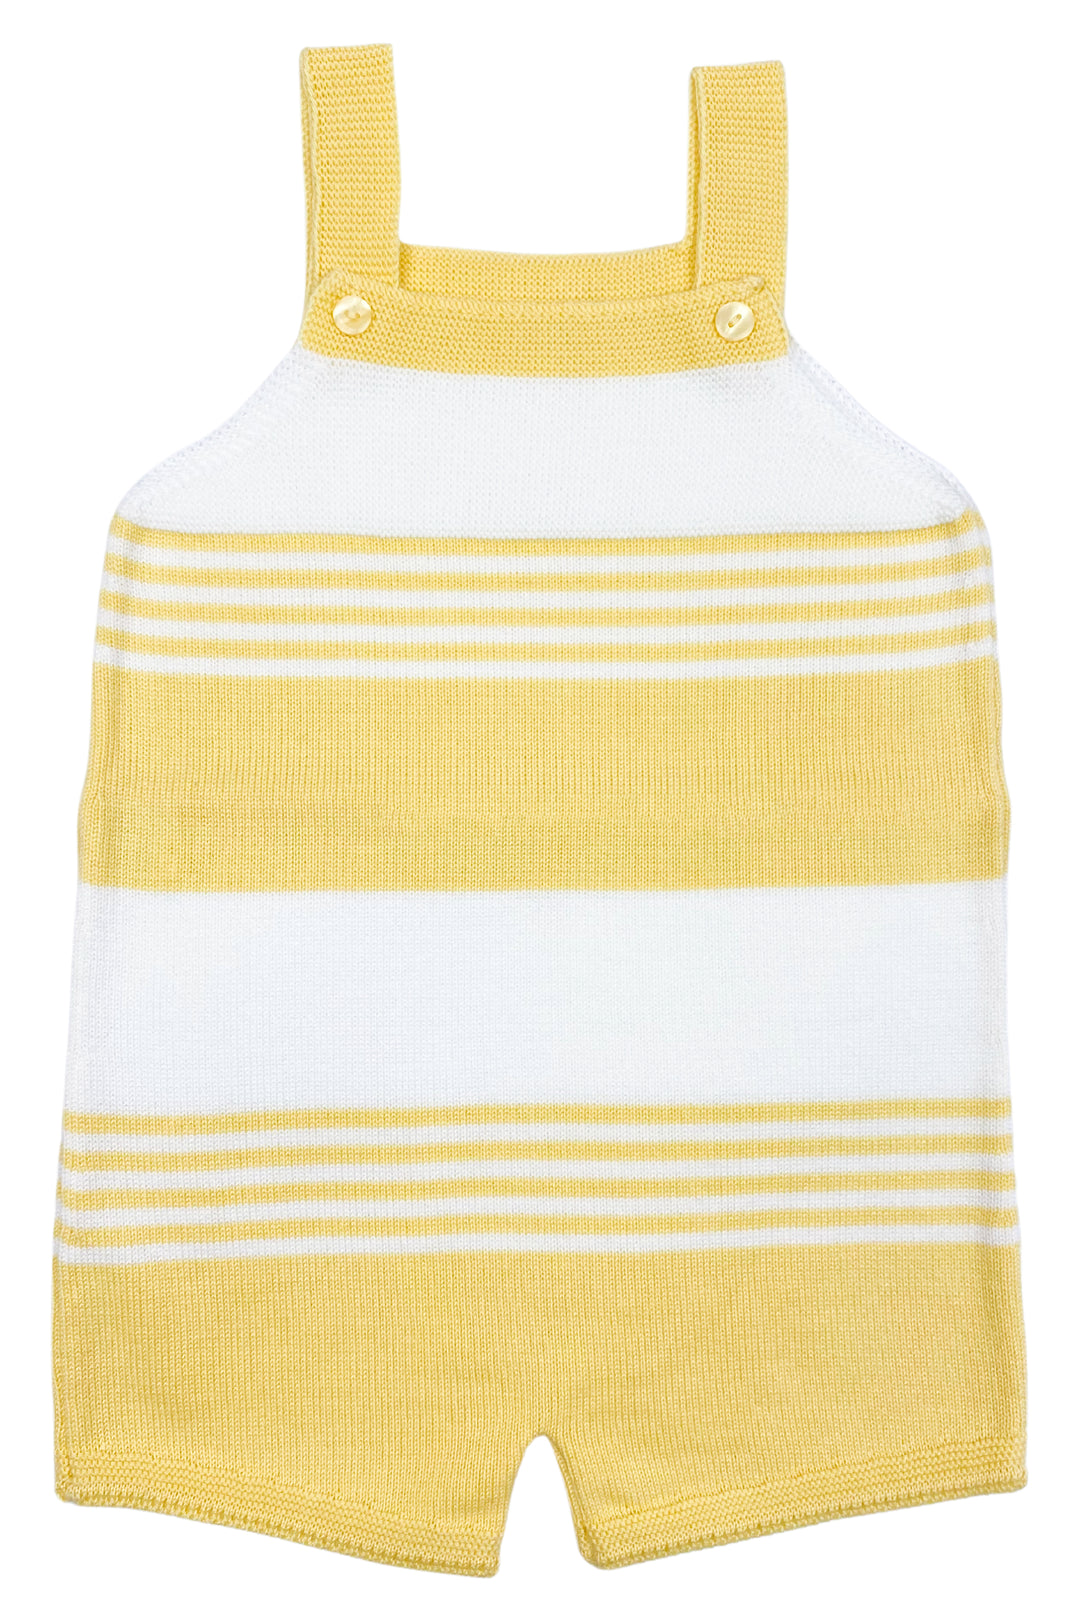 Granlei "Jovie" Pale Yellow Stripe Knit Dungarees | iphoneandroidapplications